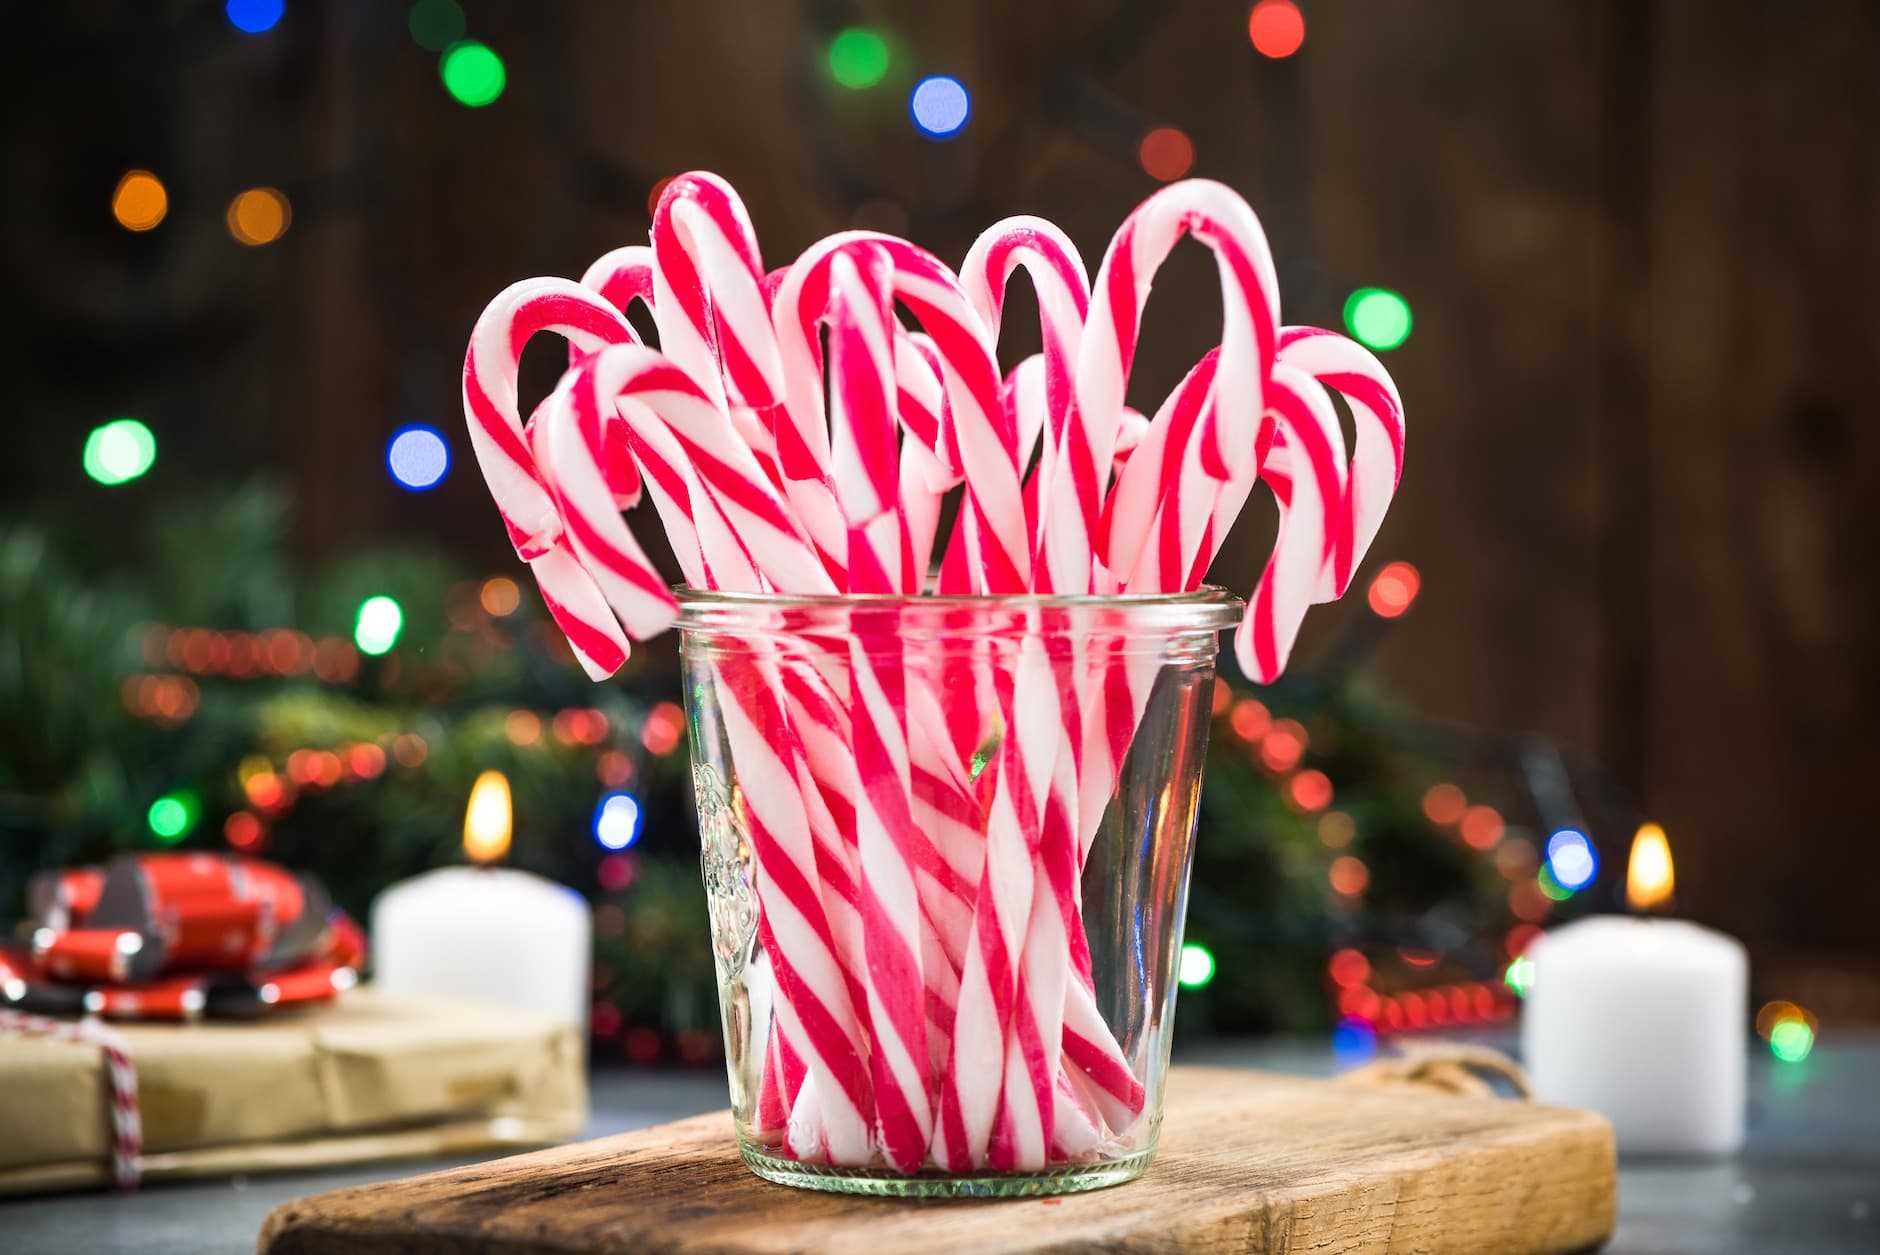 Candy Canes: History, Lore, Recipes, and More! - Farmers' Almanac ...